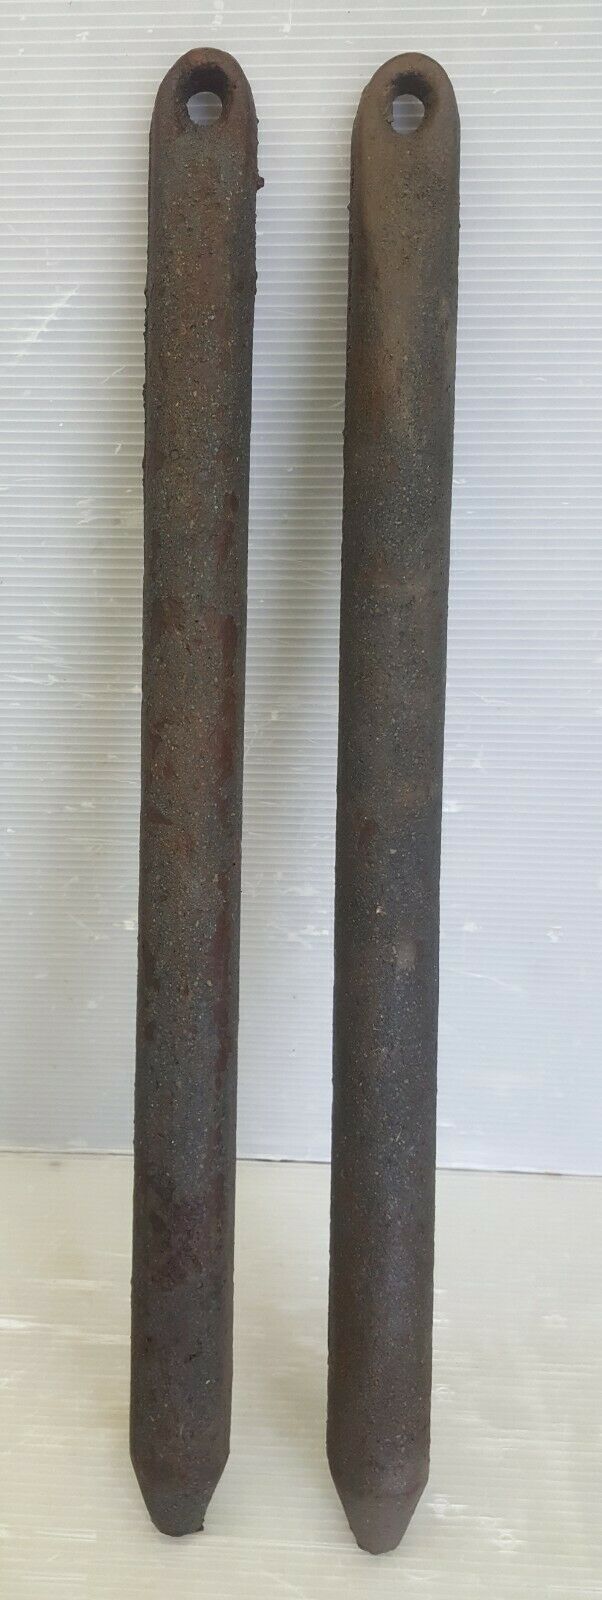 Lot of 2 Vintage Cast Iron Window Weights 11 Pounds Each 23